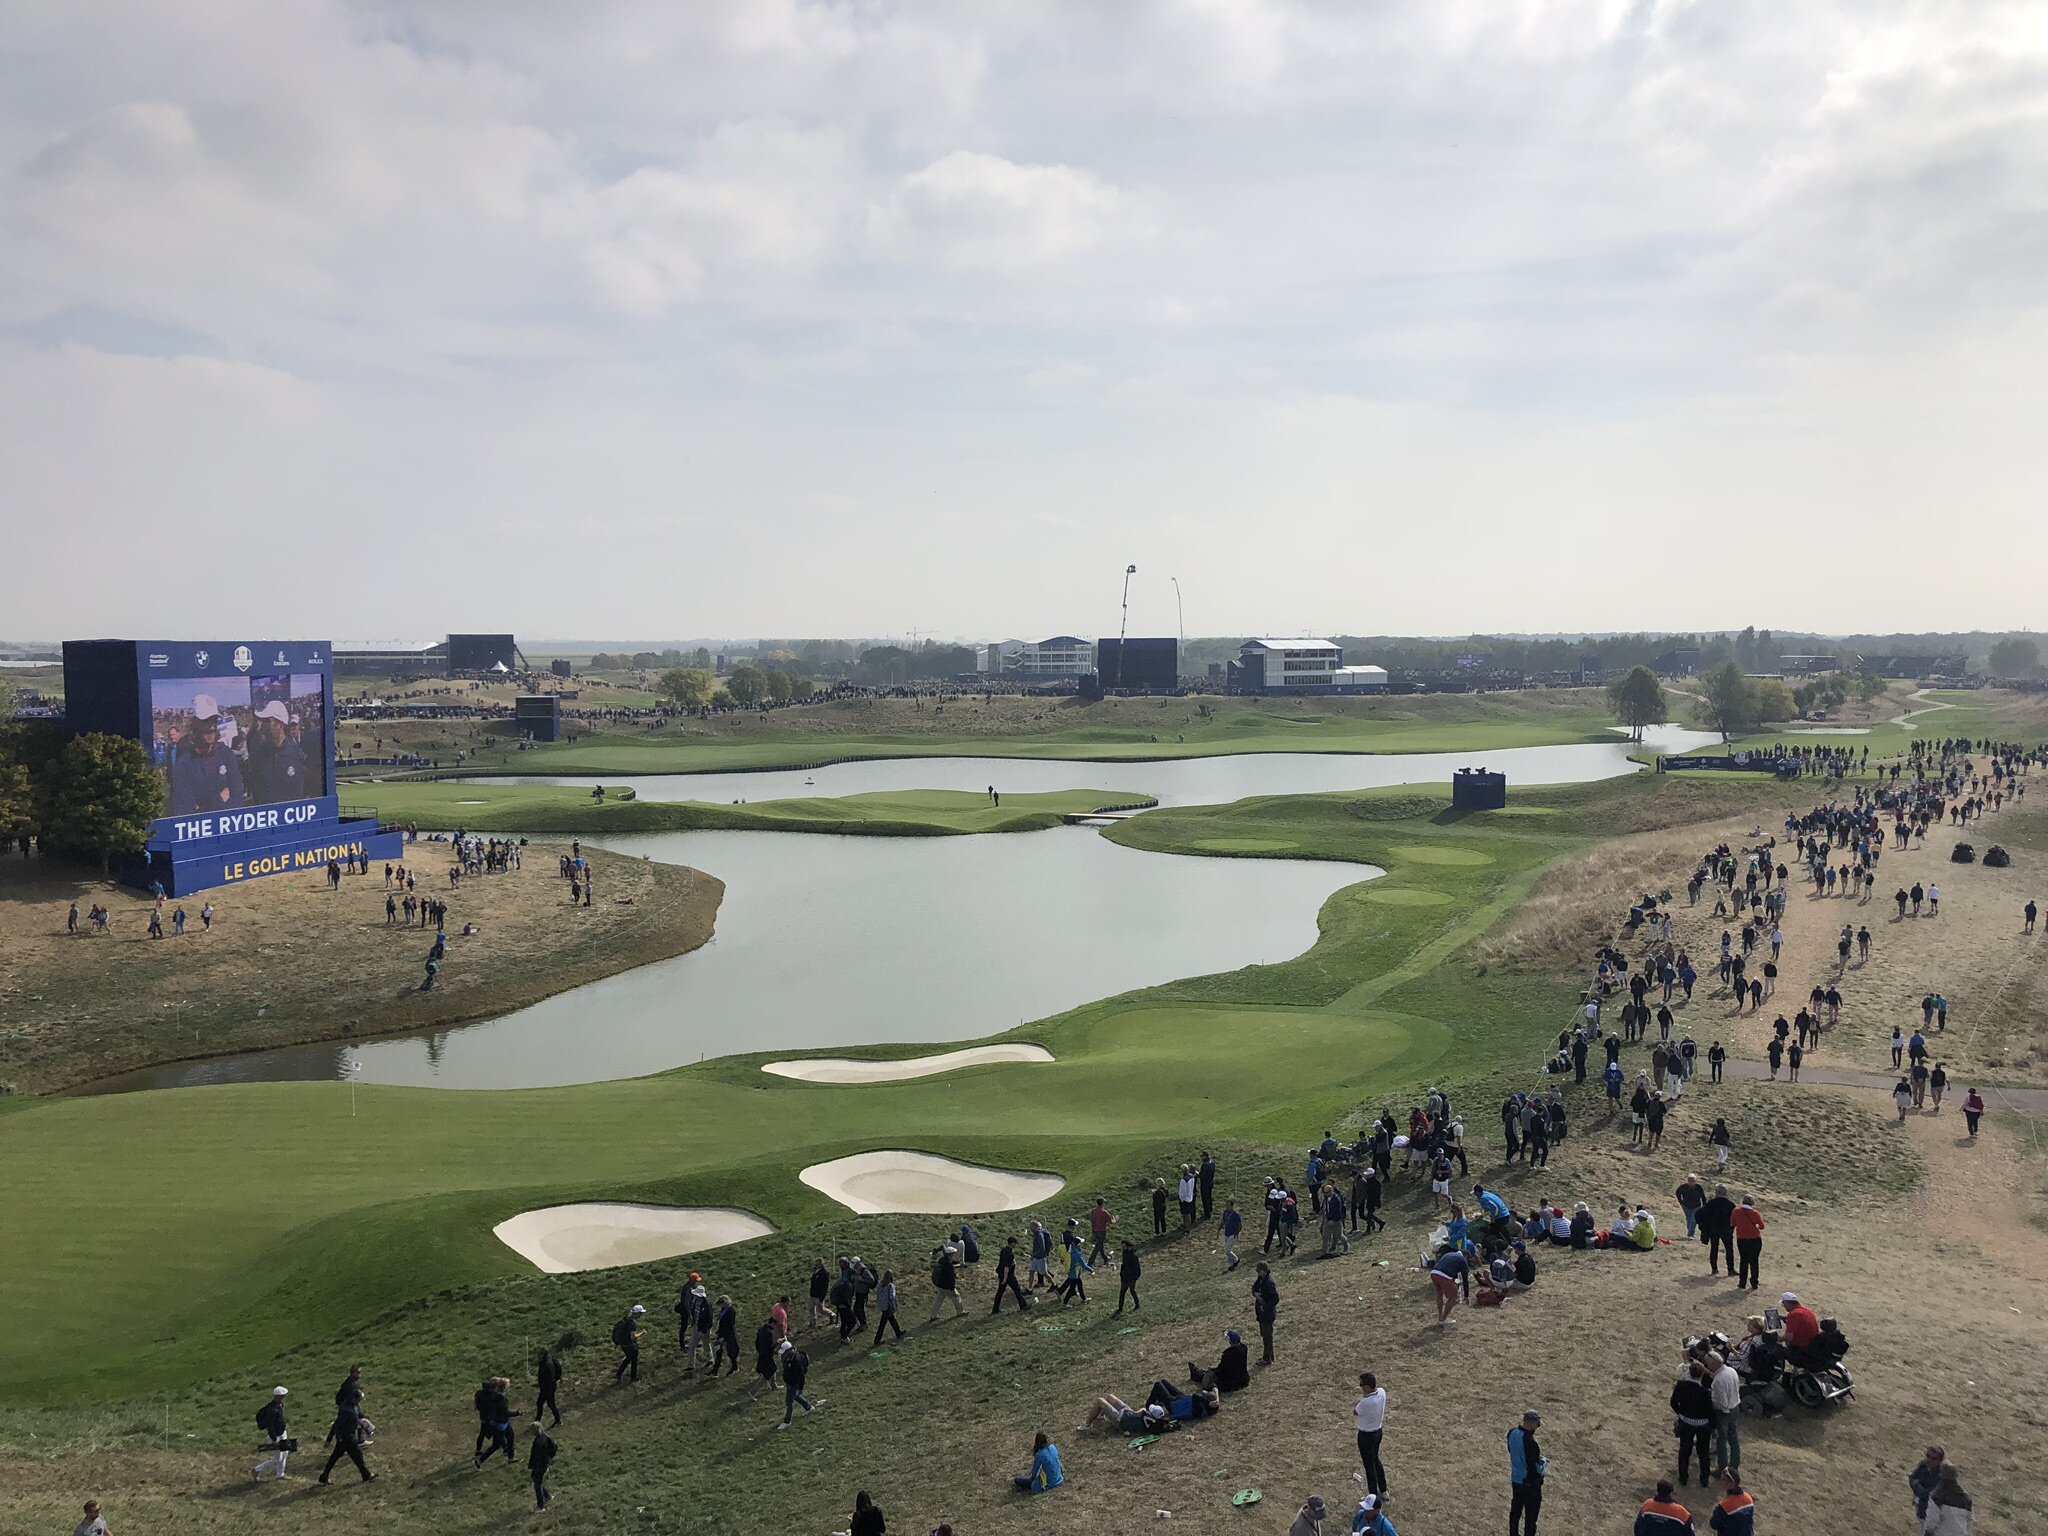 Ryder Cup 2018 - BMW Lounge